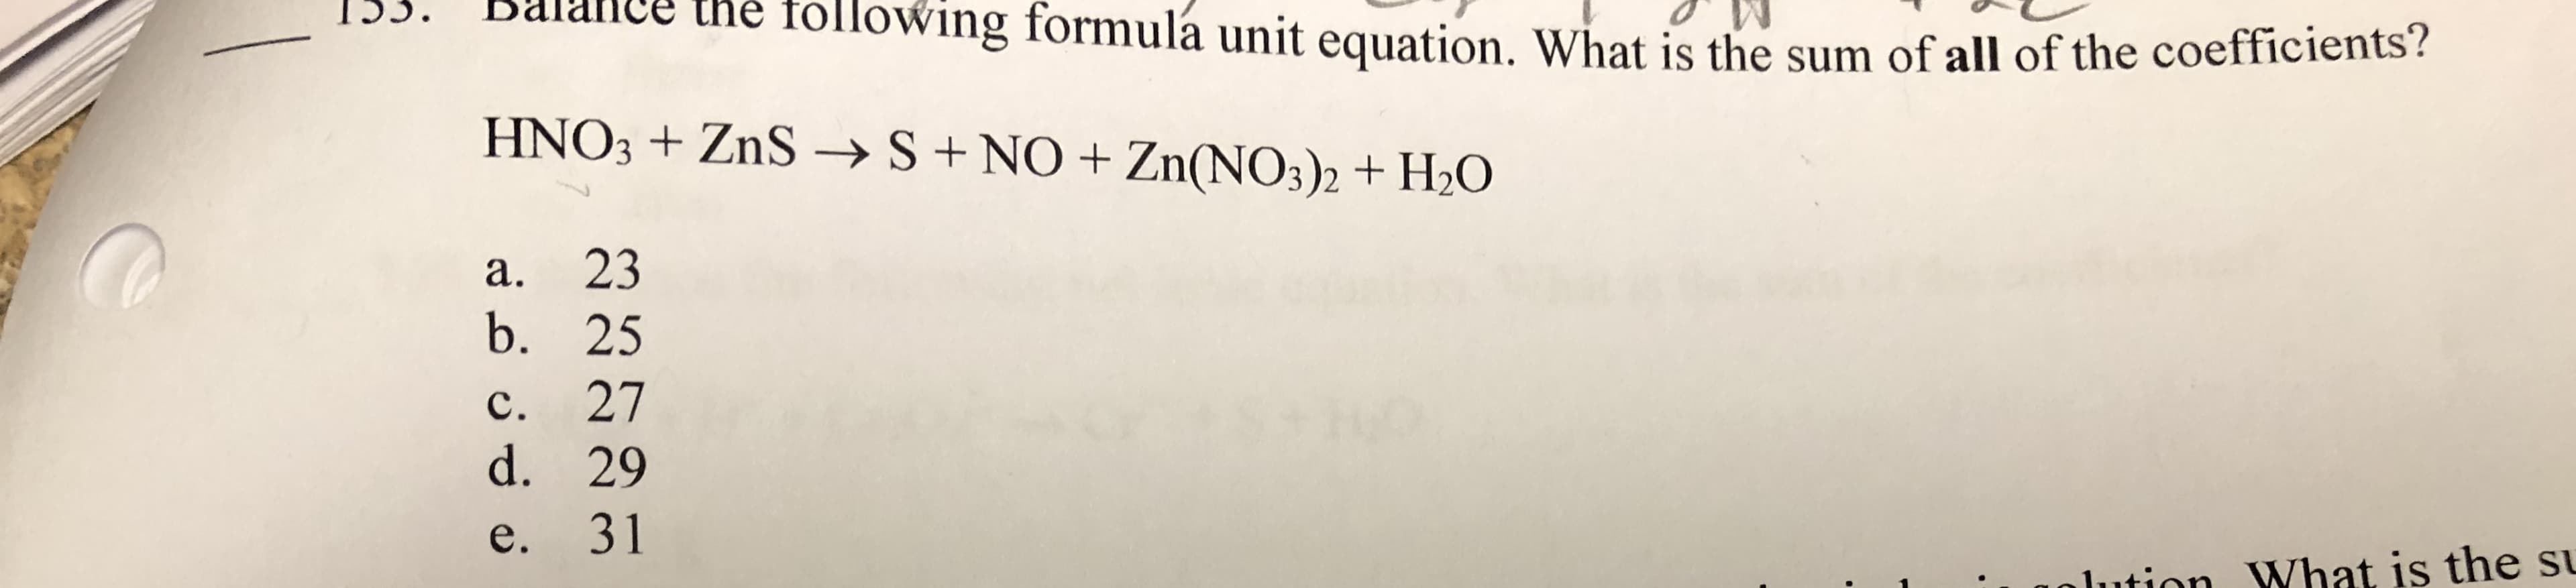 I.S. B
he tollowing formulá unit equation. What is the sum of all of the coefficients?
HNO3 ZnS- S+ NO Zn(NOs)2 + 20
a. 23
b. 25
c. 27
d. 29
e. 31
ution What is the s
